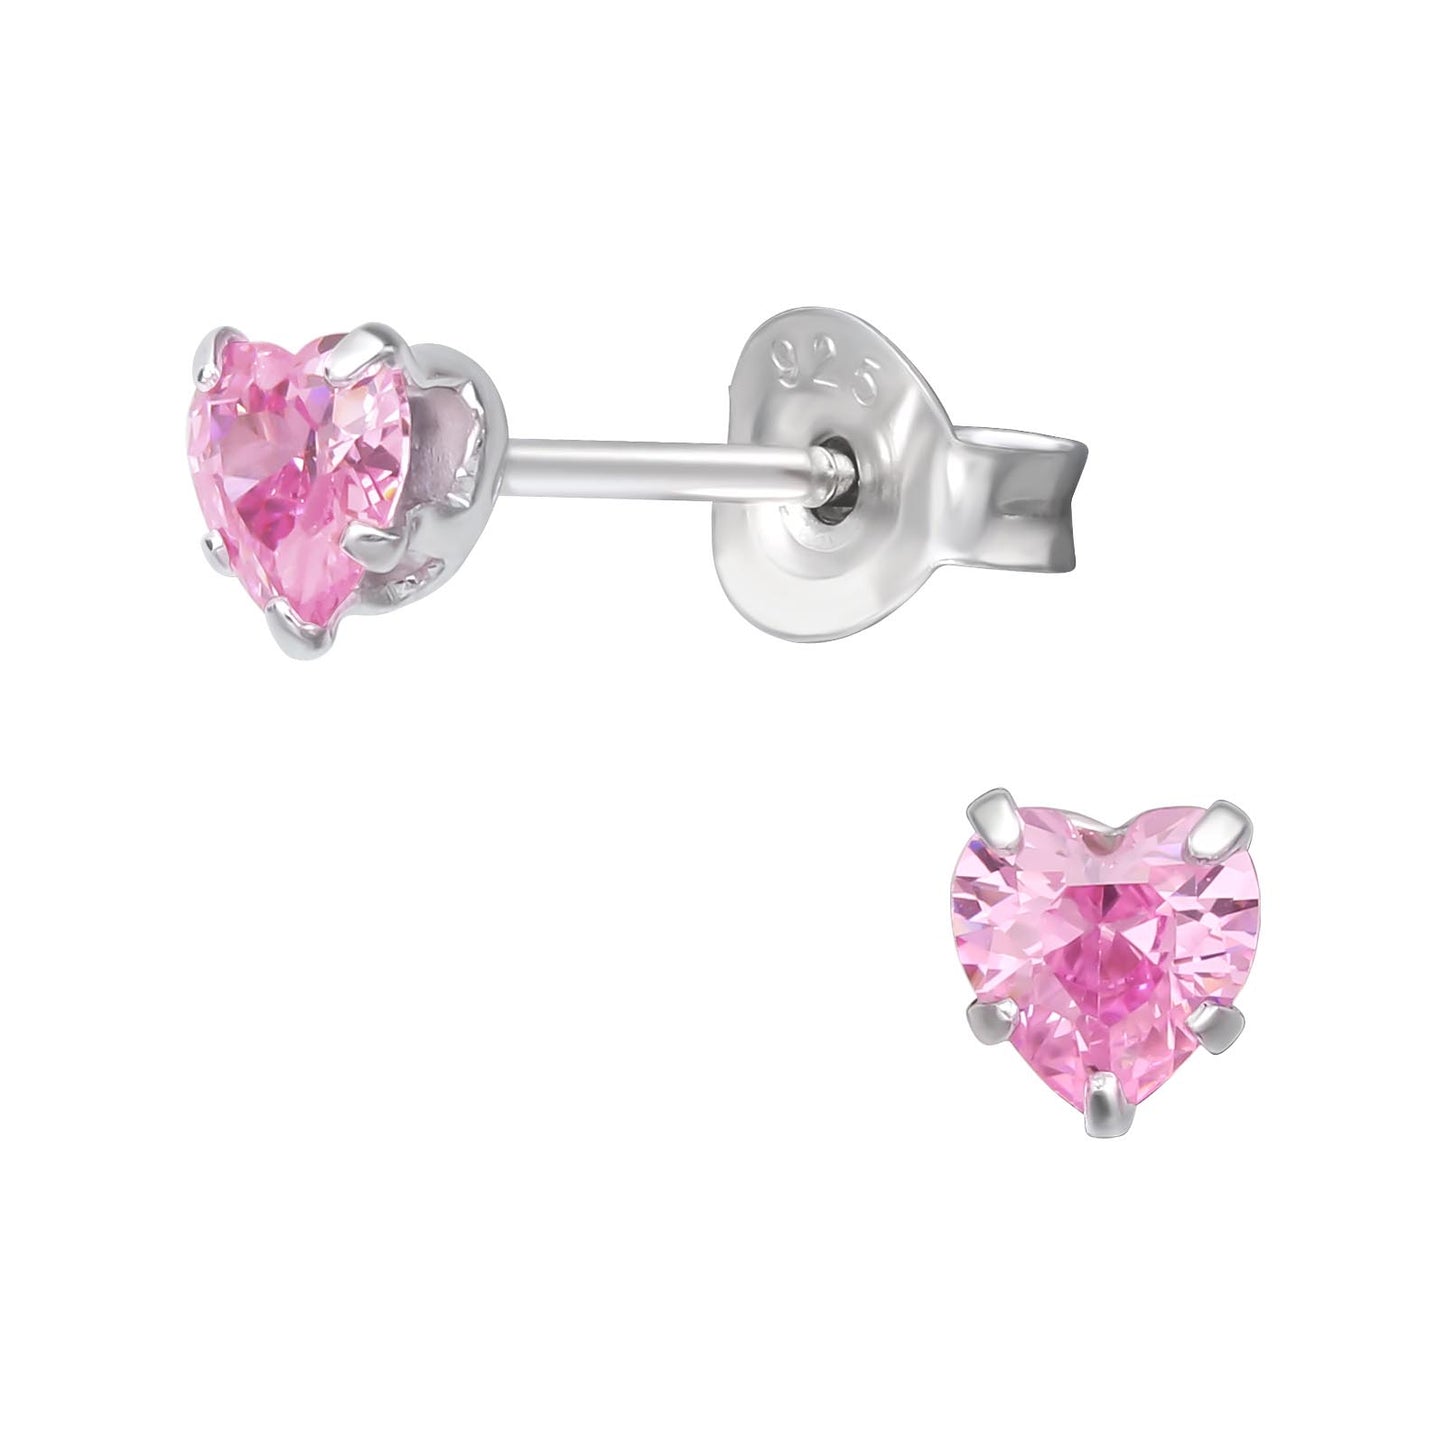 Sparkly Pink Heart Crystal Studs for Girls - Rhodium Plated Sterling Silver Earrings